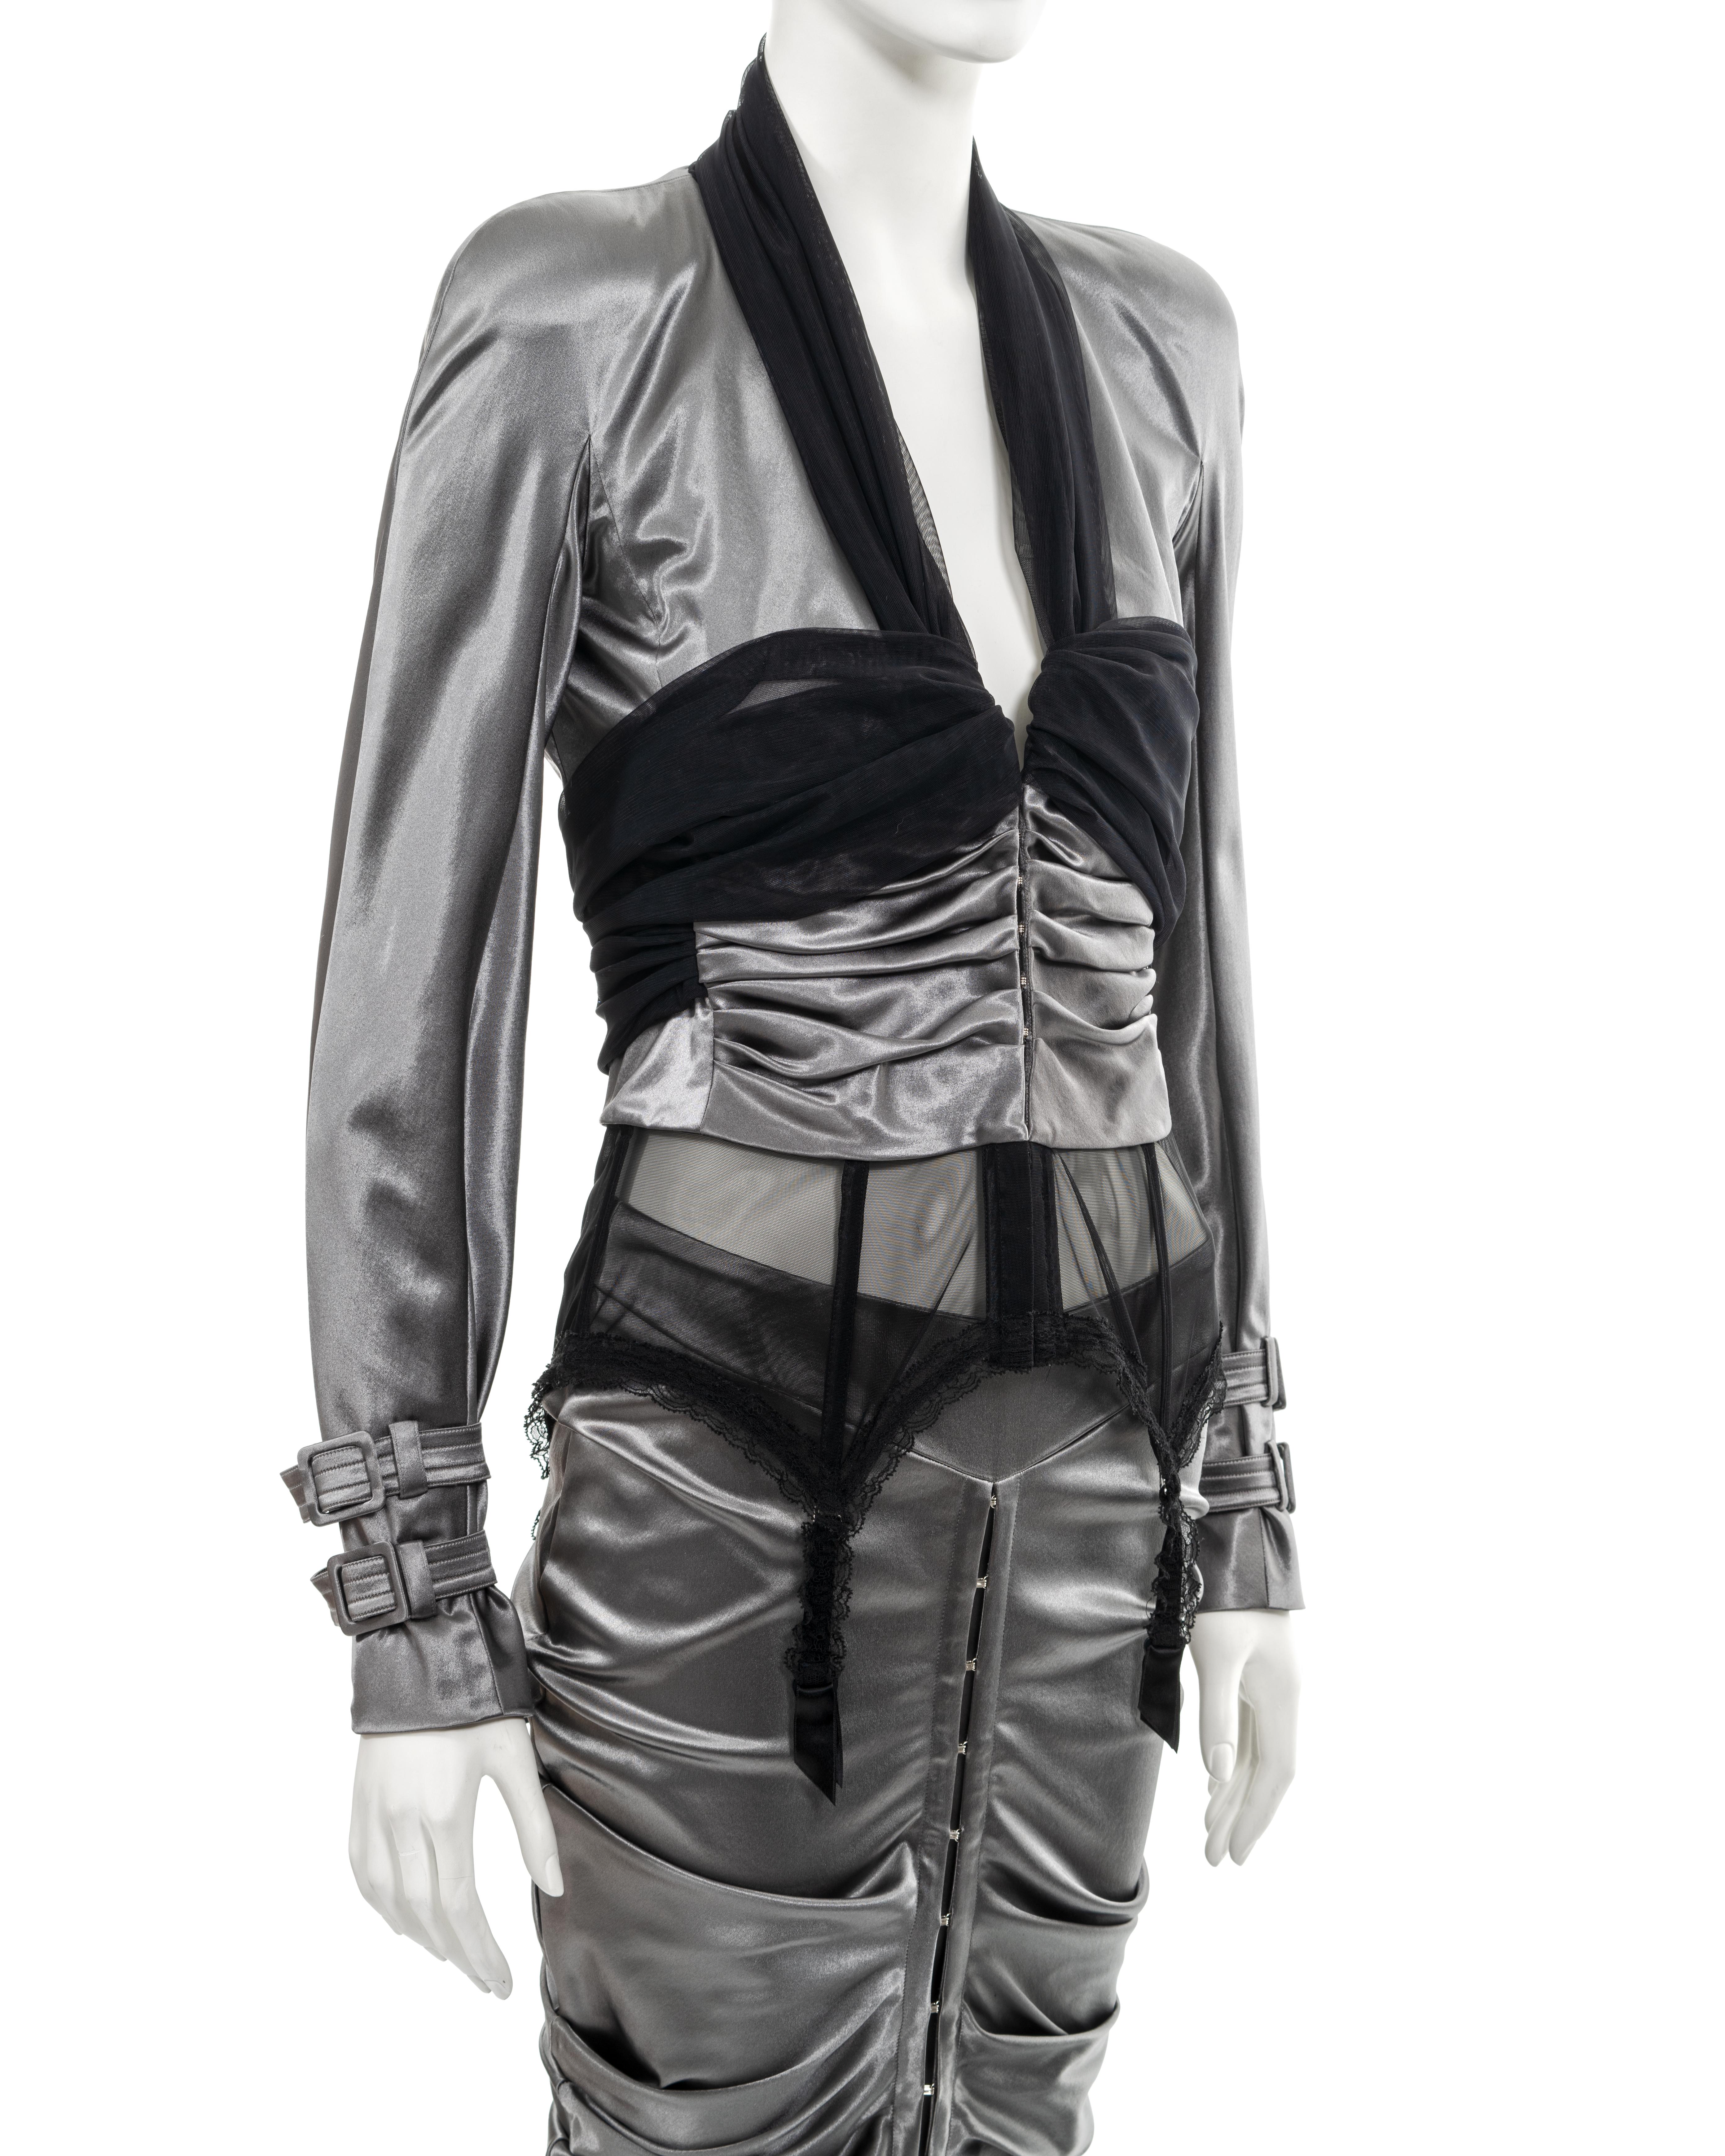 Christian Dior by John Galliano silver-grey stretch satin skirt suit, ss 2004 5